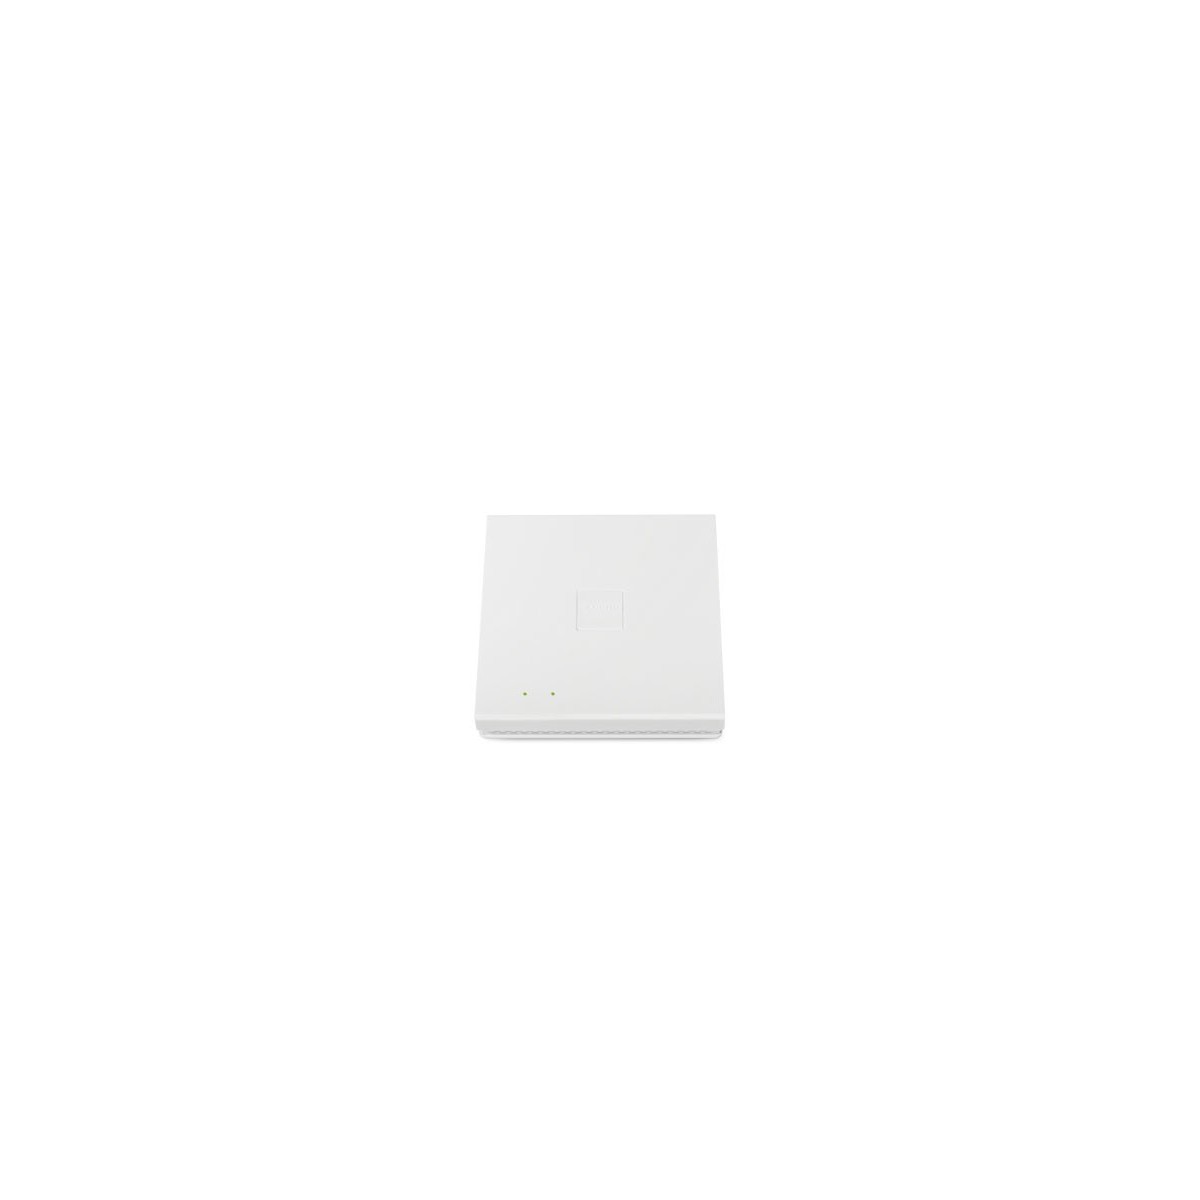 LX-6400 - Access Point - 802.11ac Wave 2